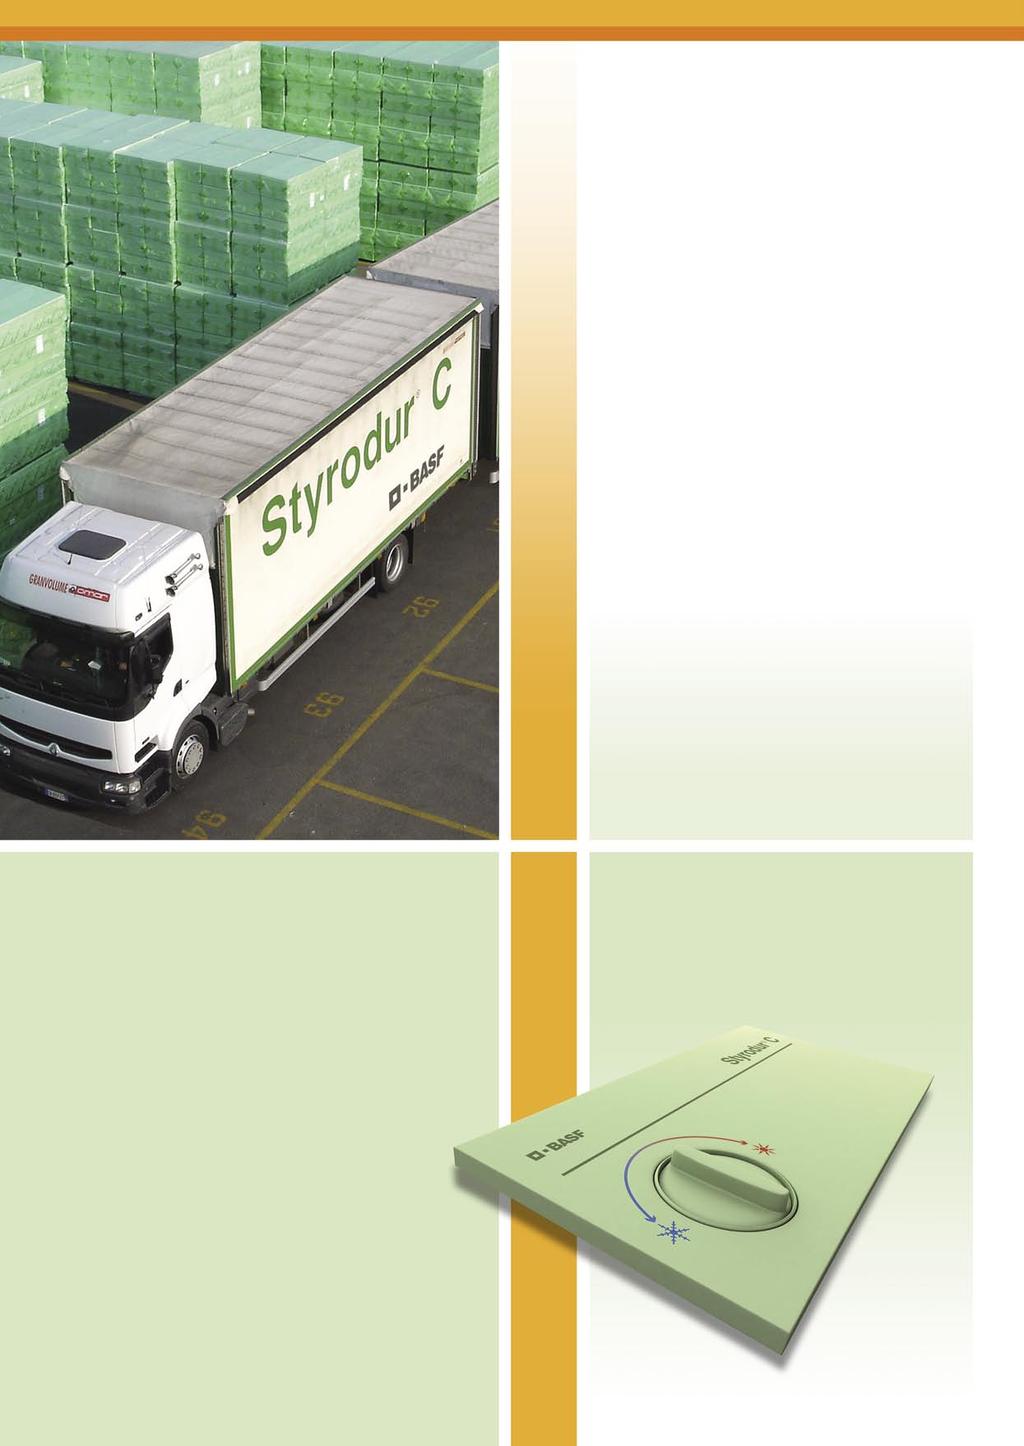 Styrodur C The ideal product for builders merchants Styrodur C is subjected to extensive quality assurance tests.